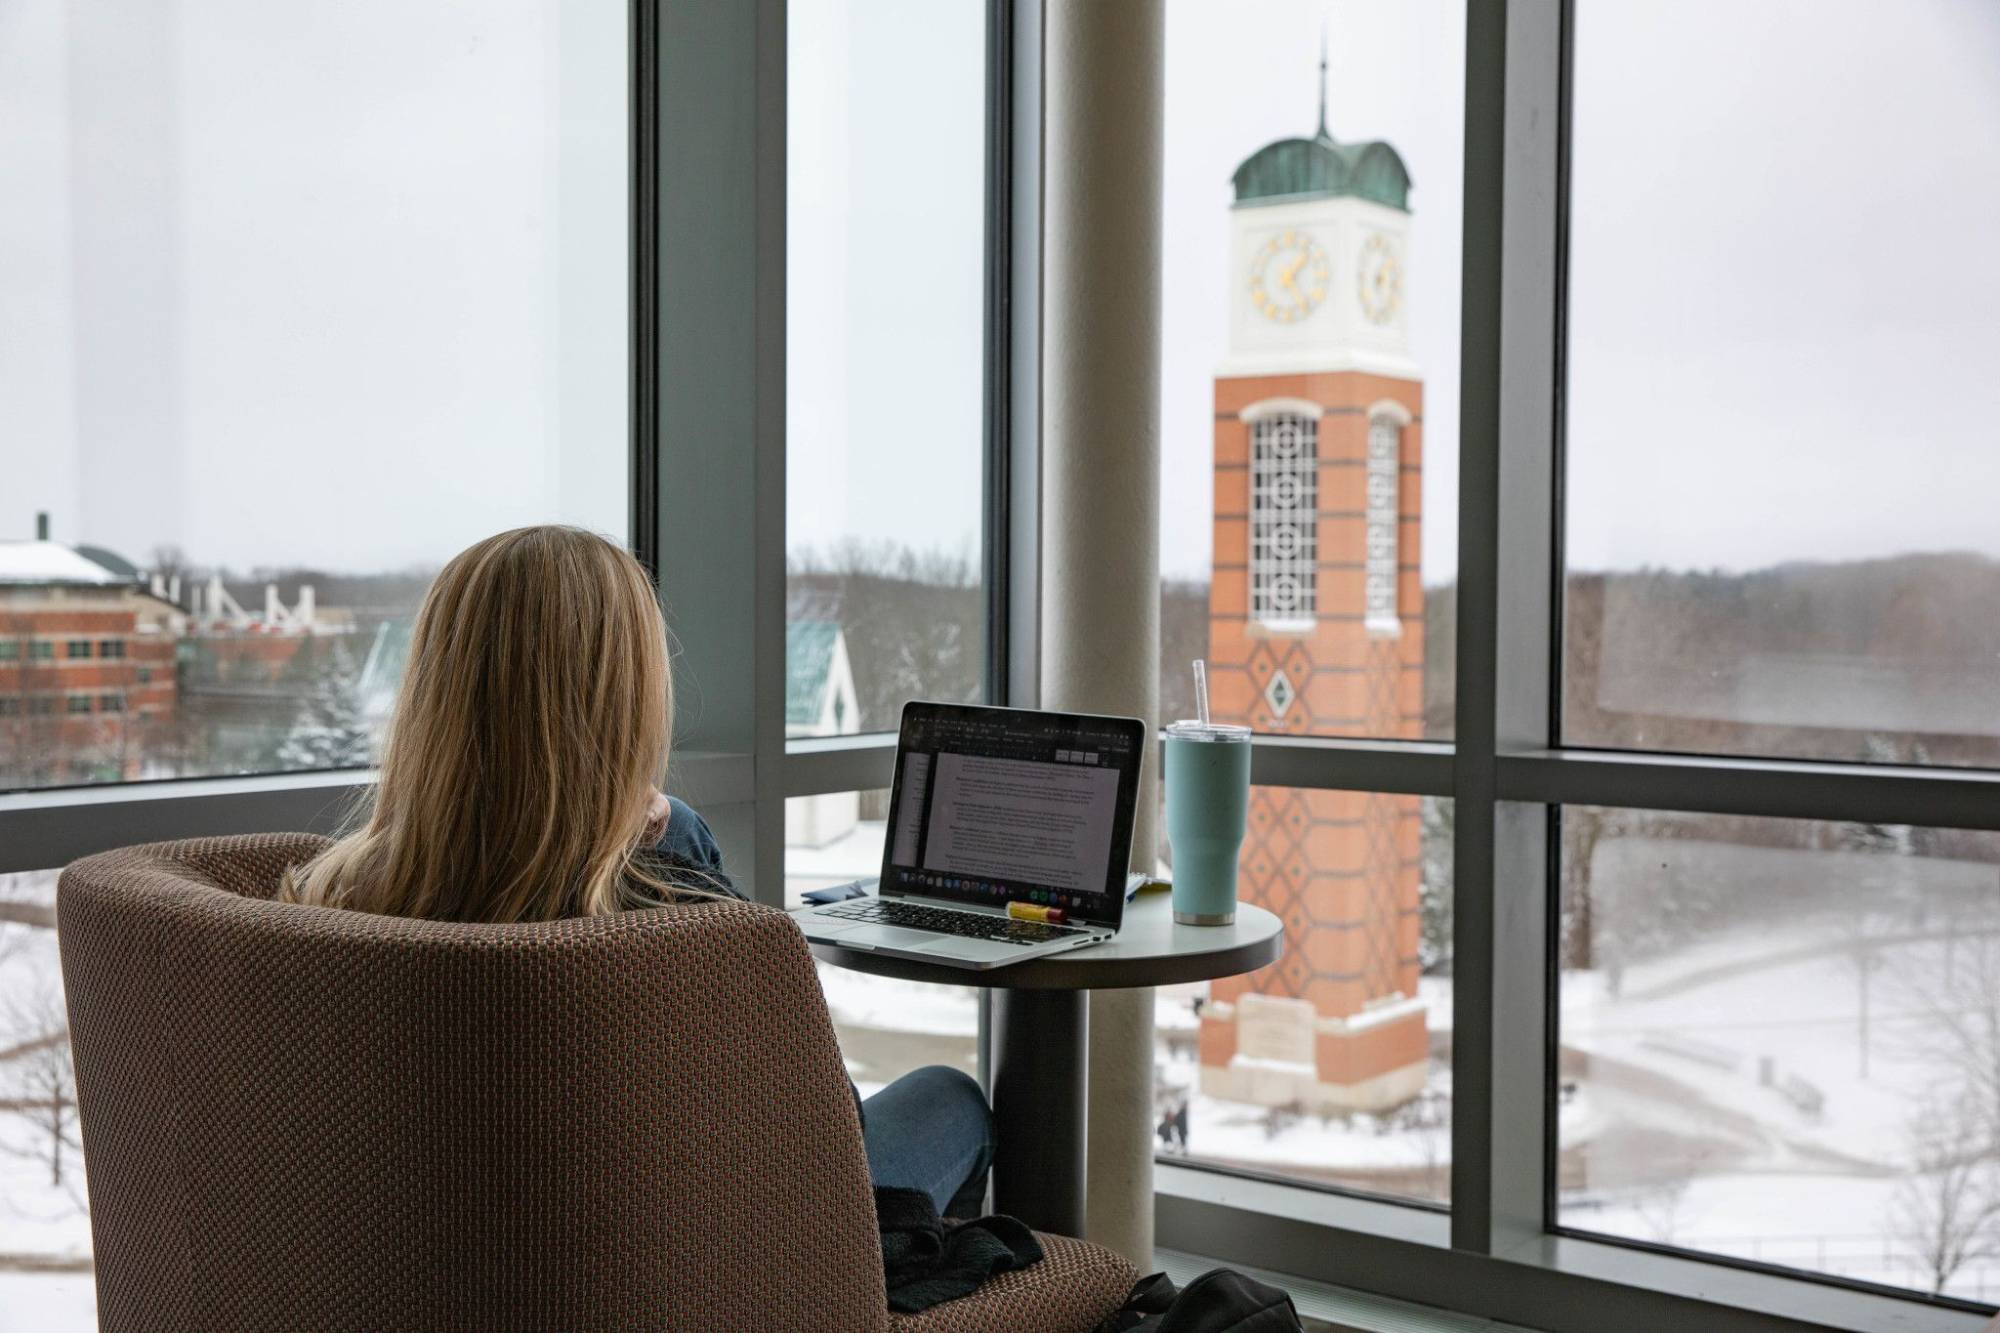 photo of student looking at computer with clock tower in the background